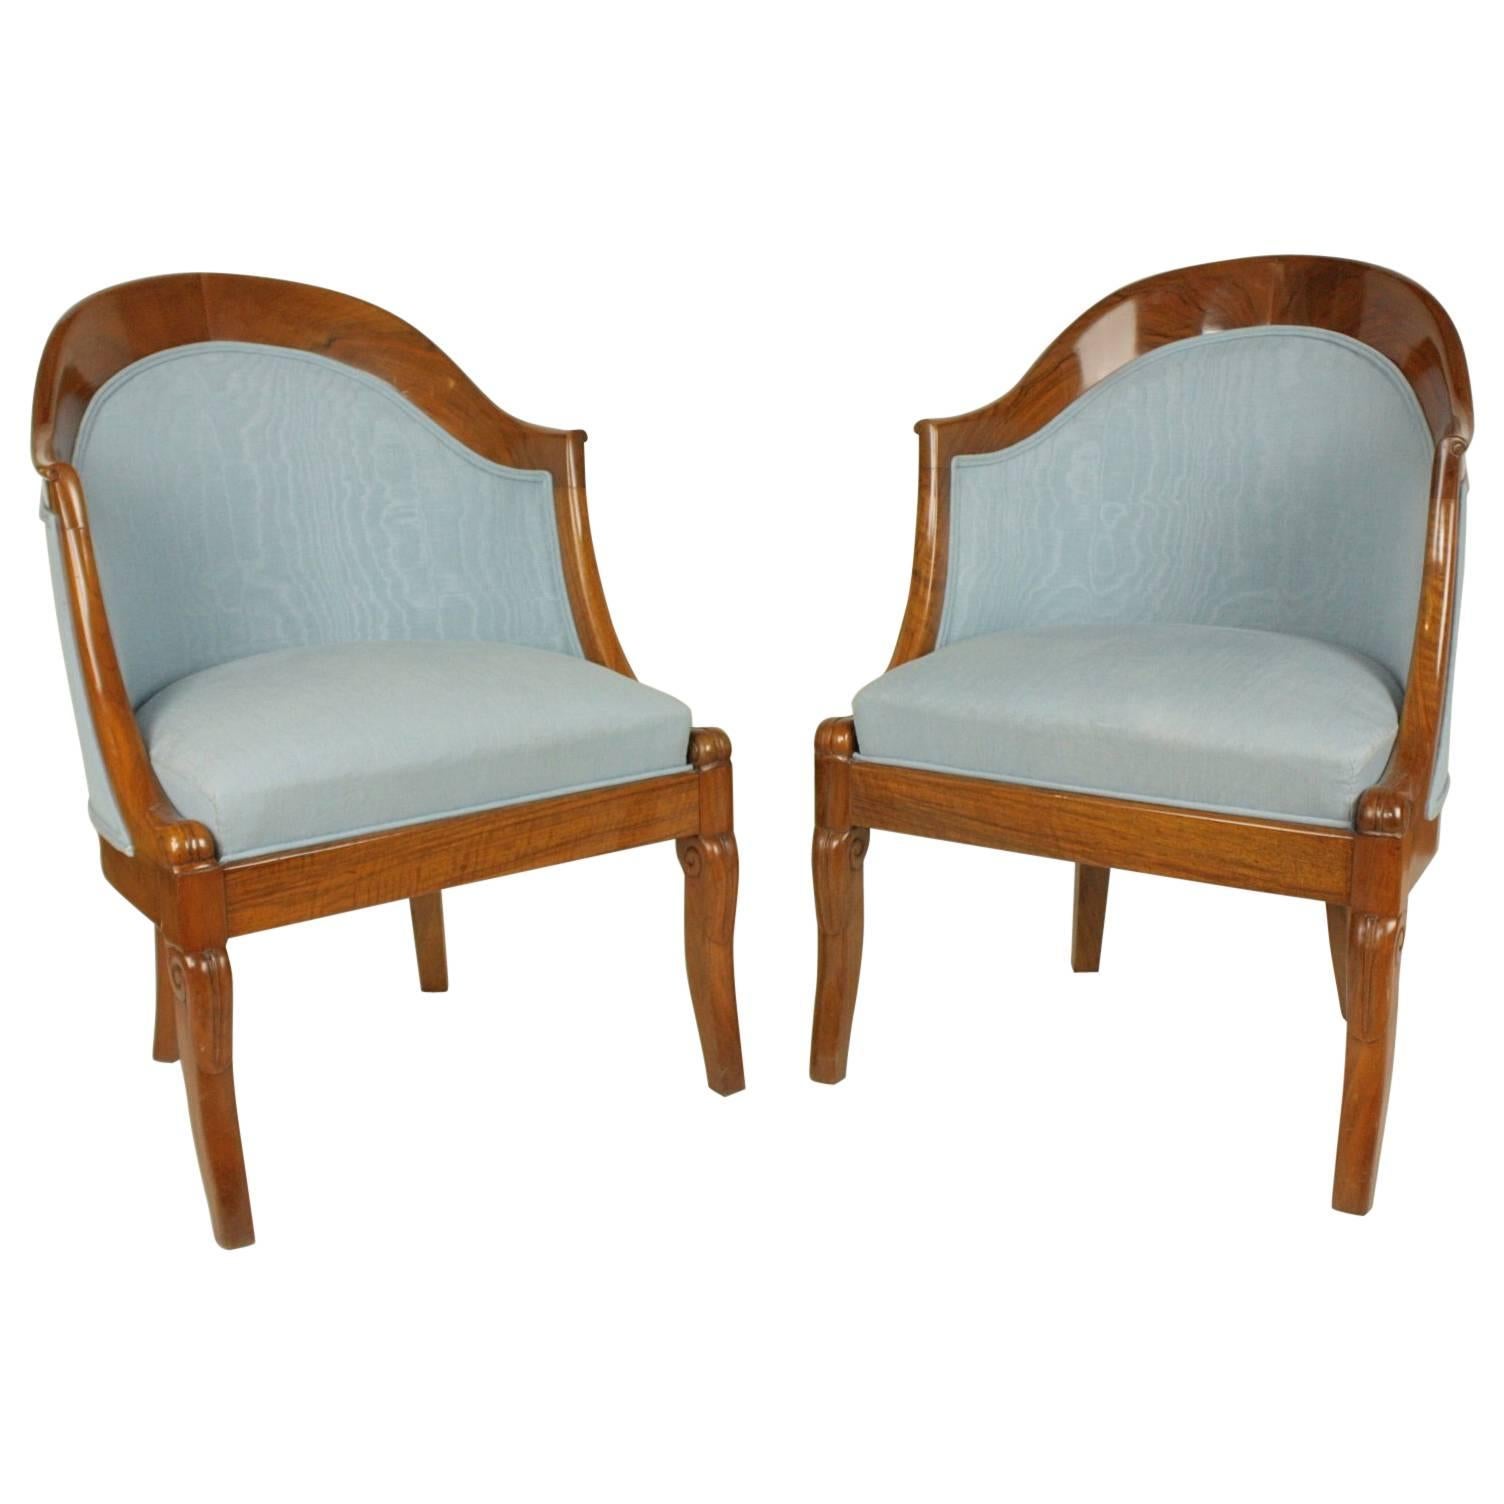 Pair of French Restauration Period Armchairs or Bergère